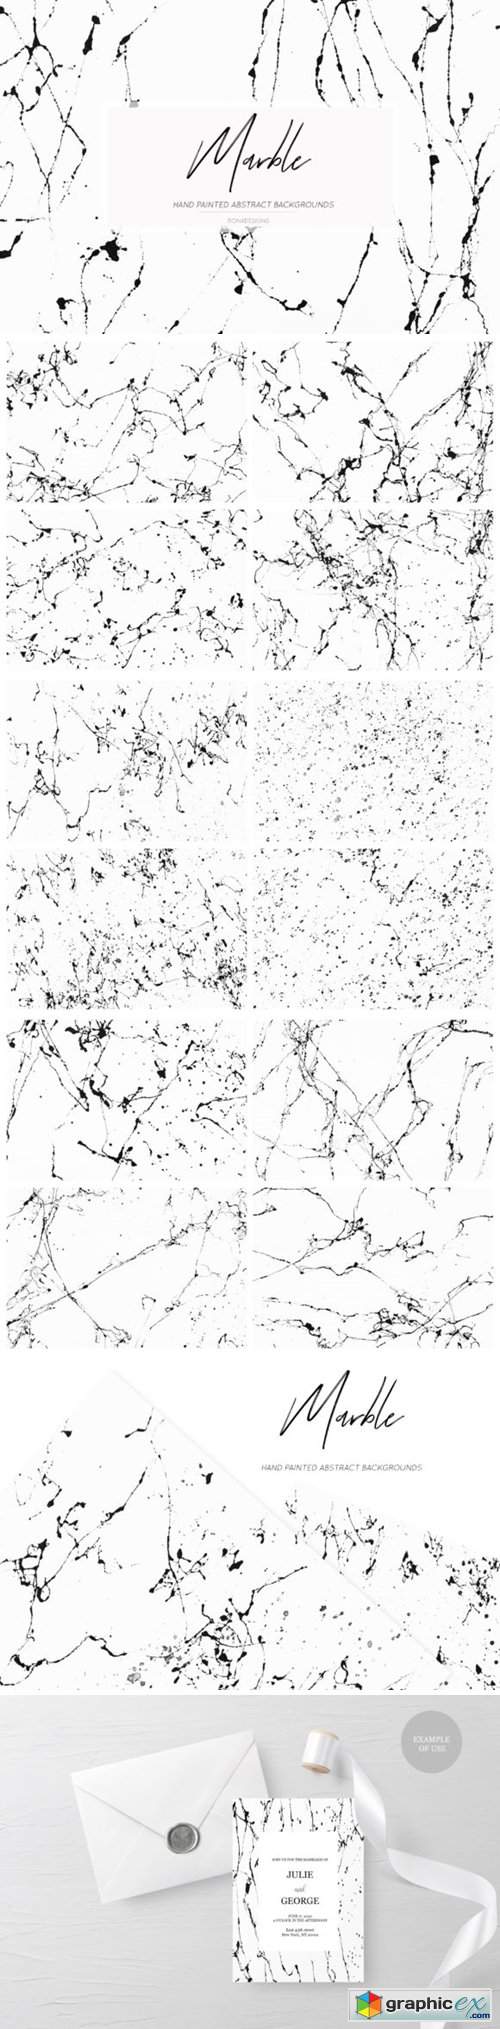 Black White Marble Backgrounds